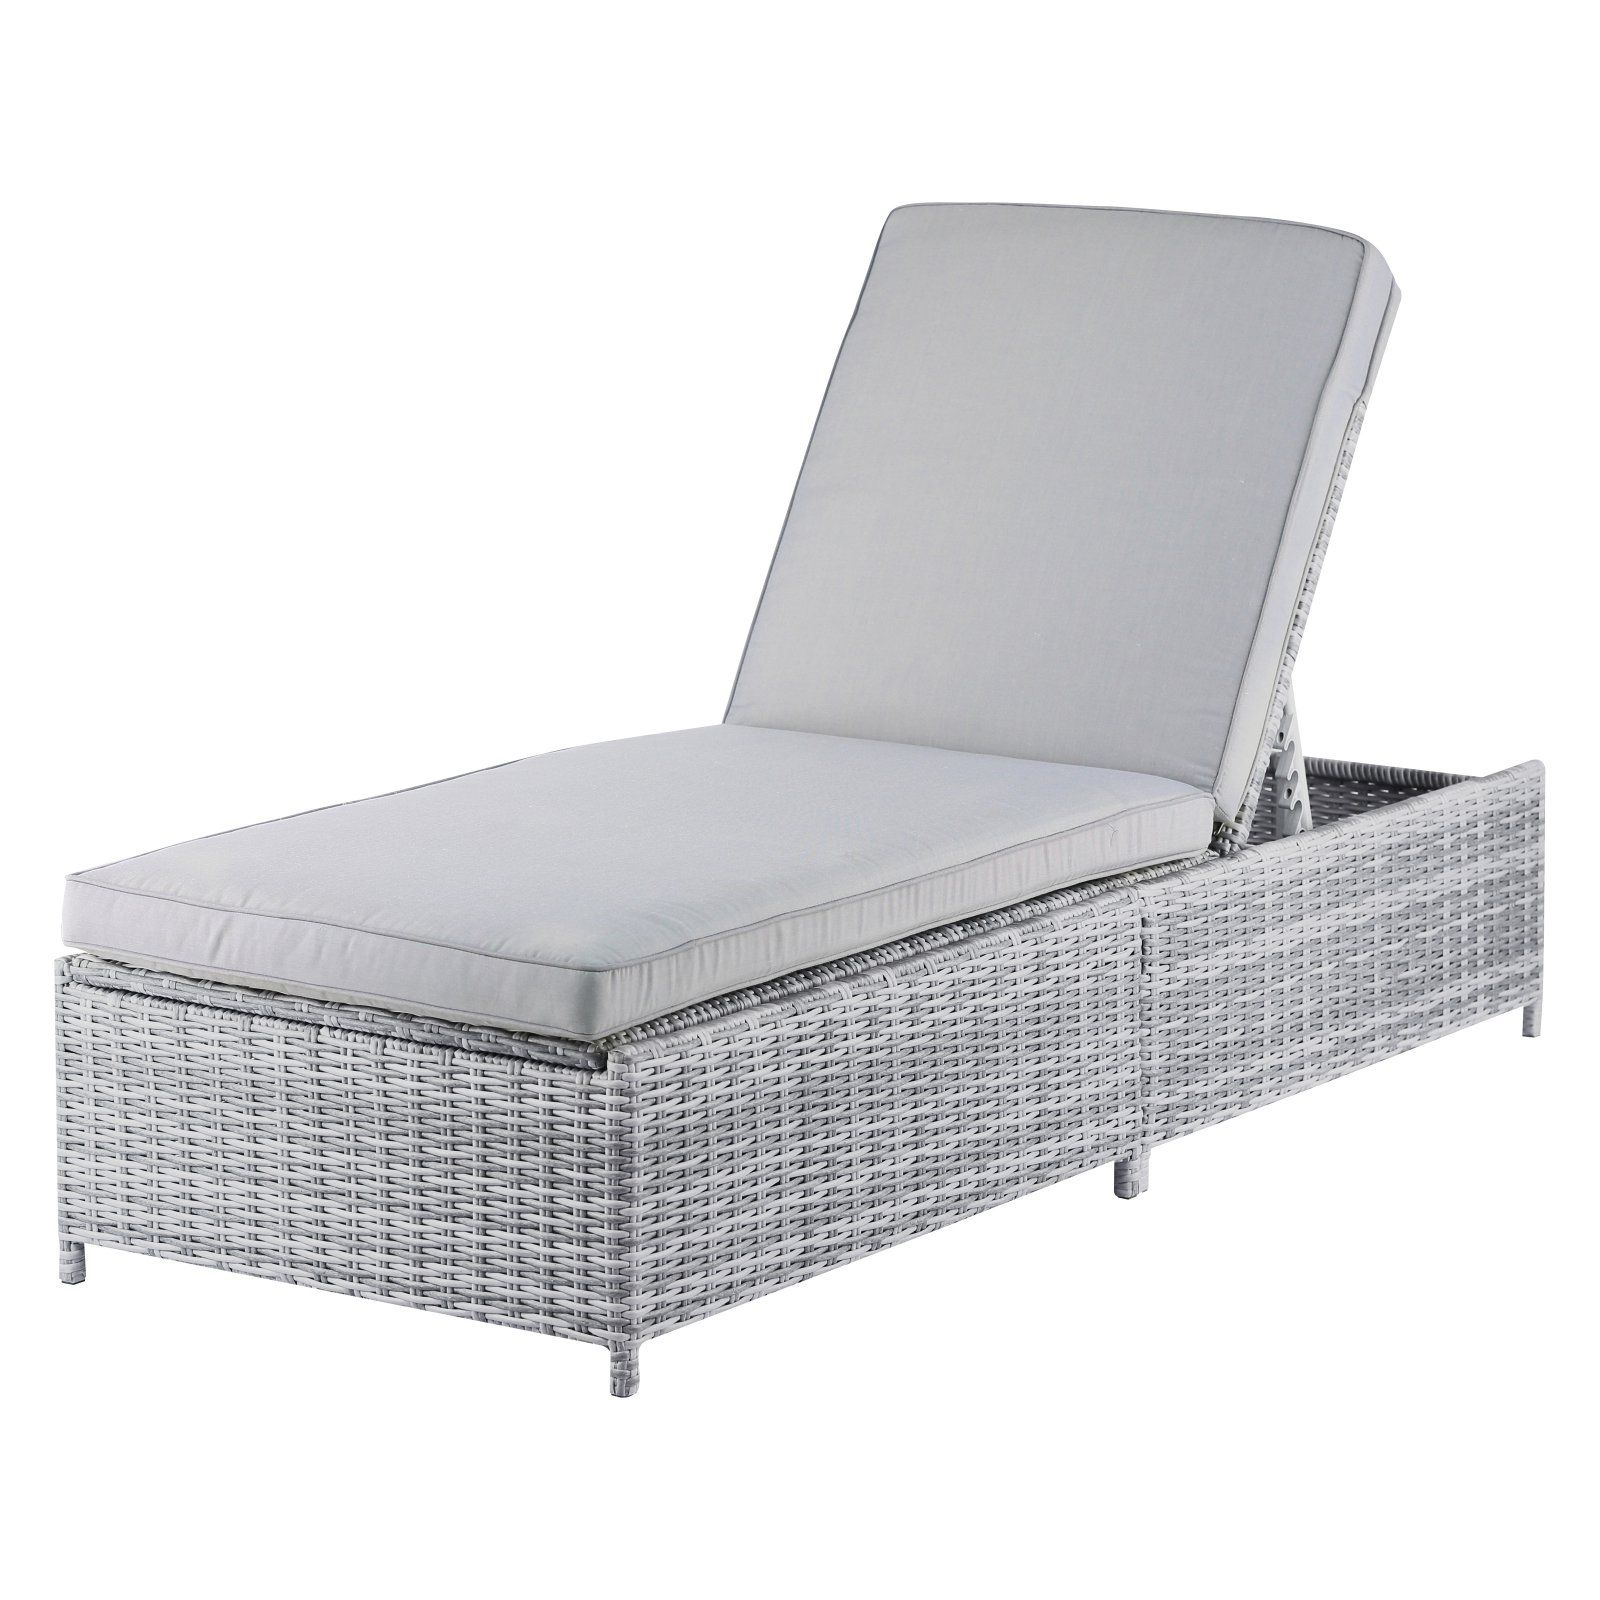 Popular Resin Wicker Aluminum Multi Position Chaise Lounges Within Elle Decor Vallauris Wicker Patio Storage Chaise Lounge (View 13 of 25)